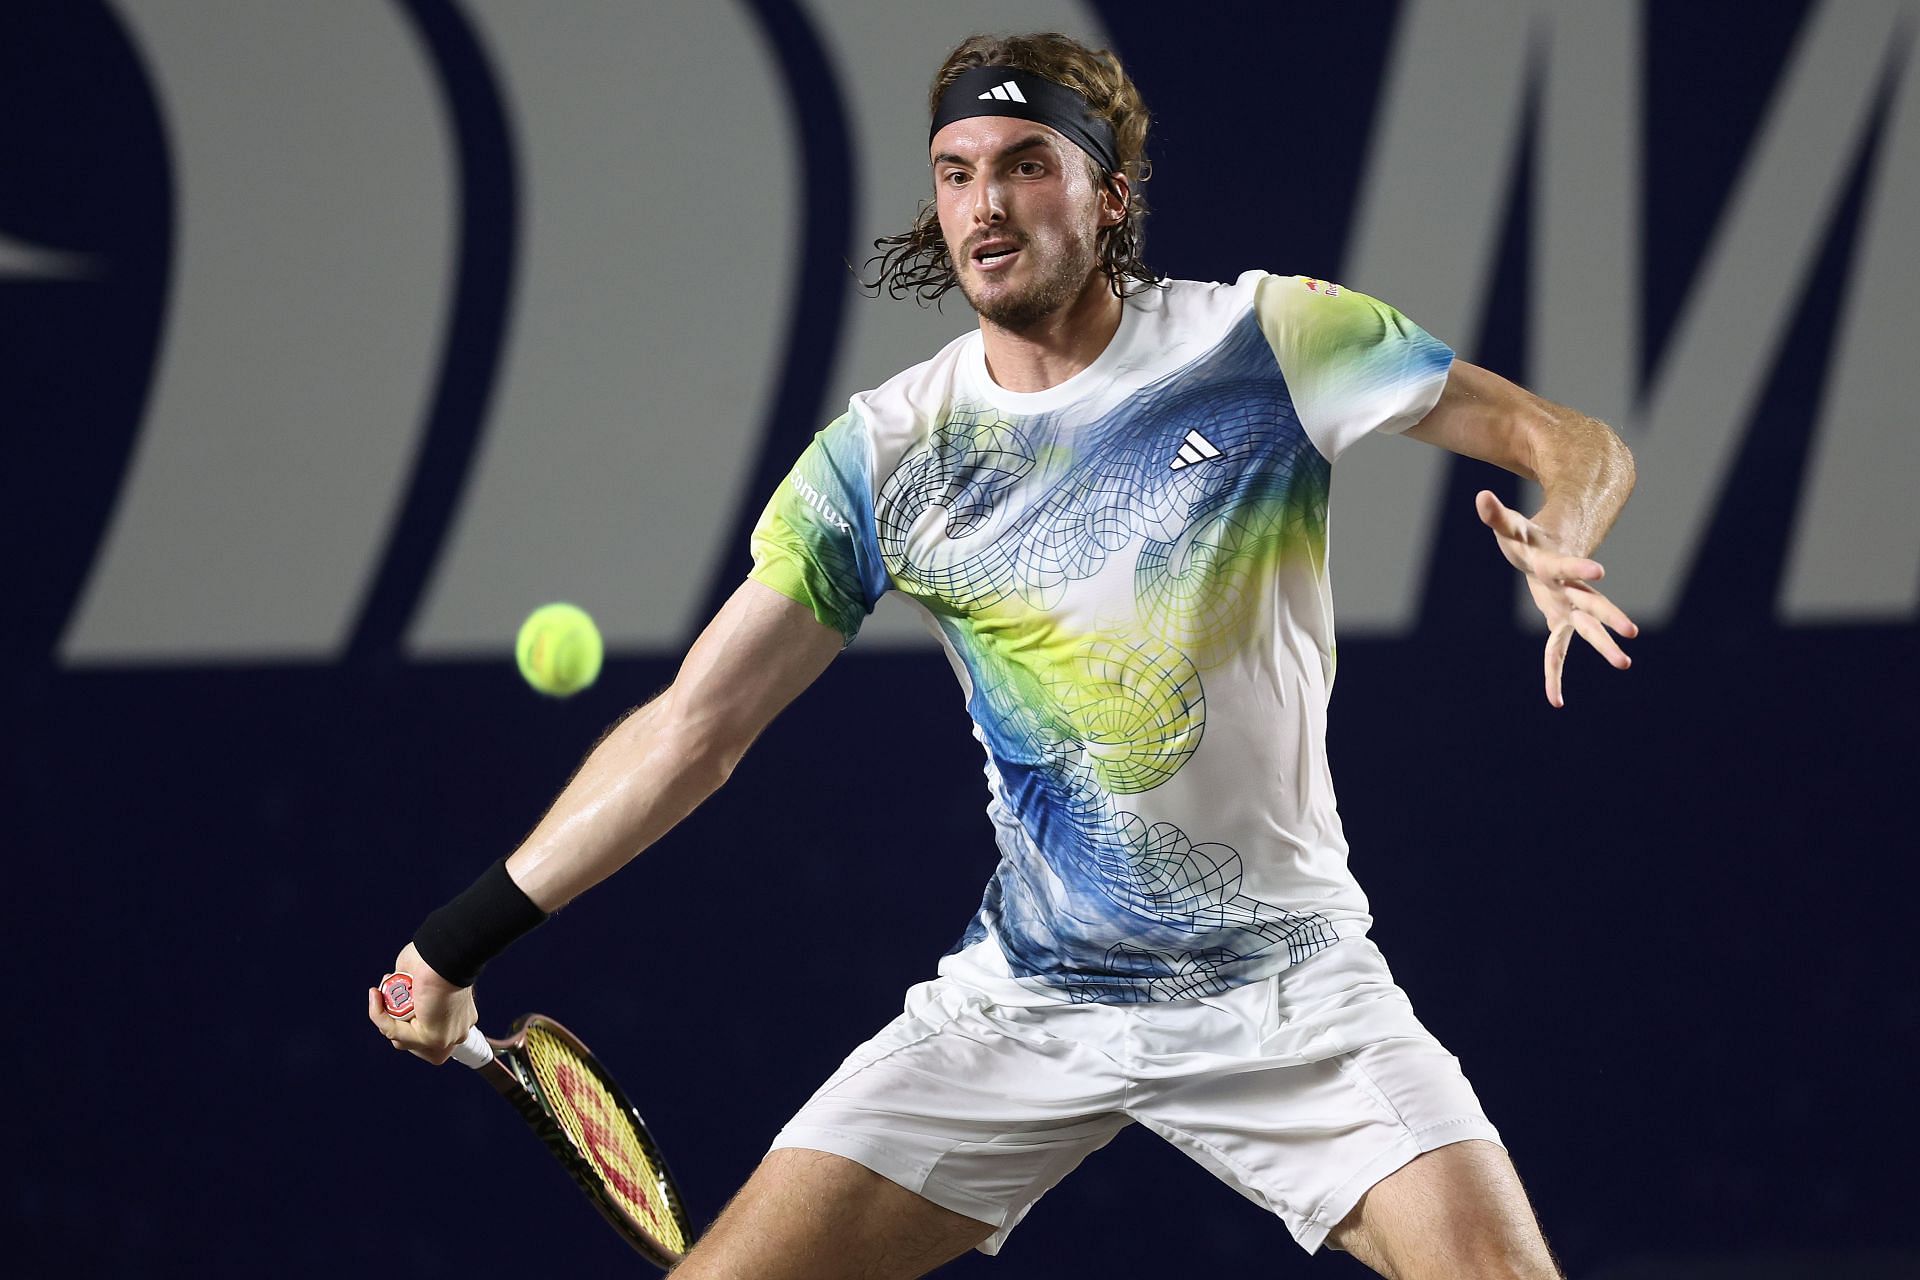 Stefanos Tsitsipas in action at the Los Cabos Open